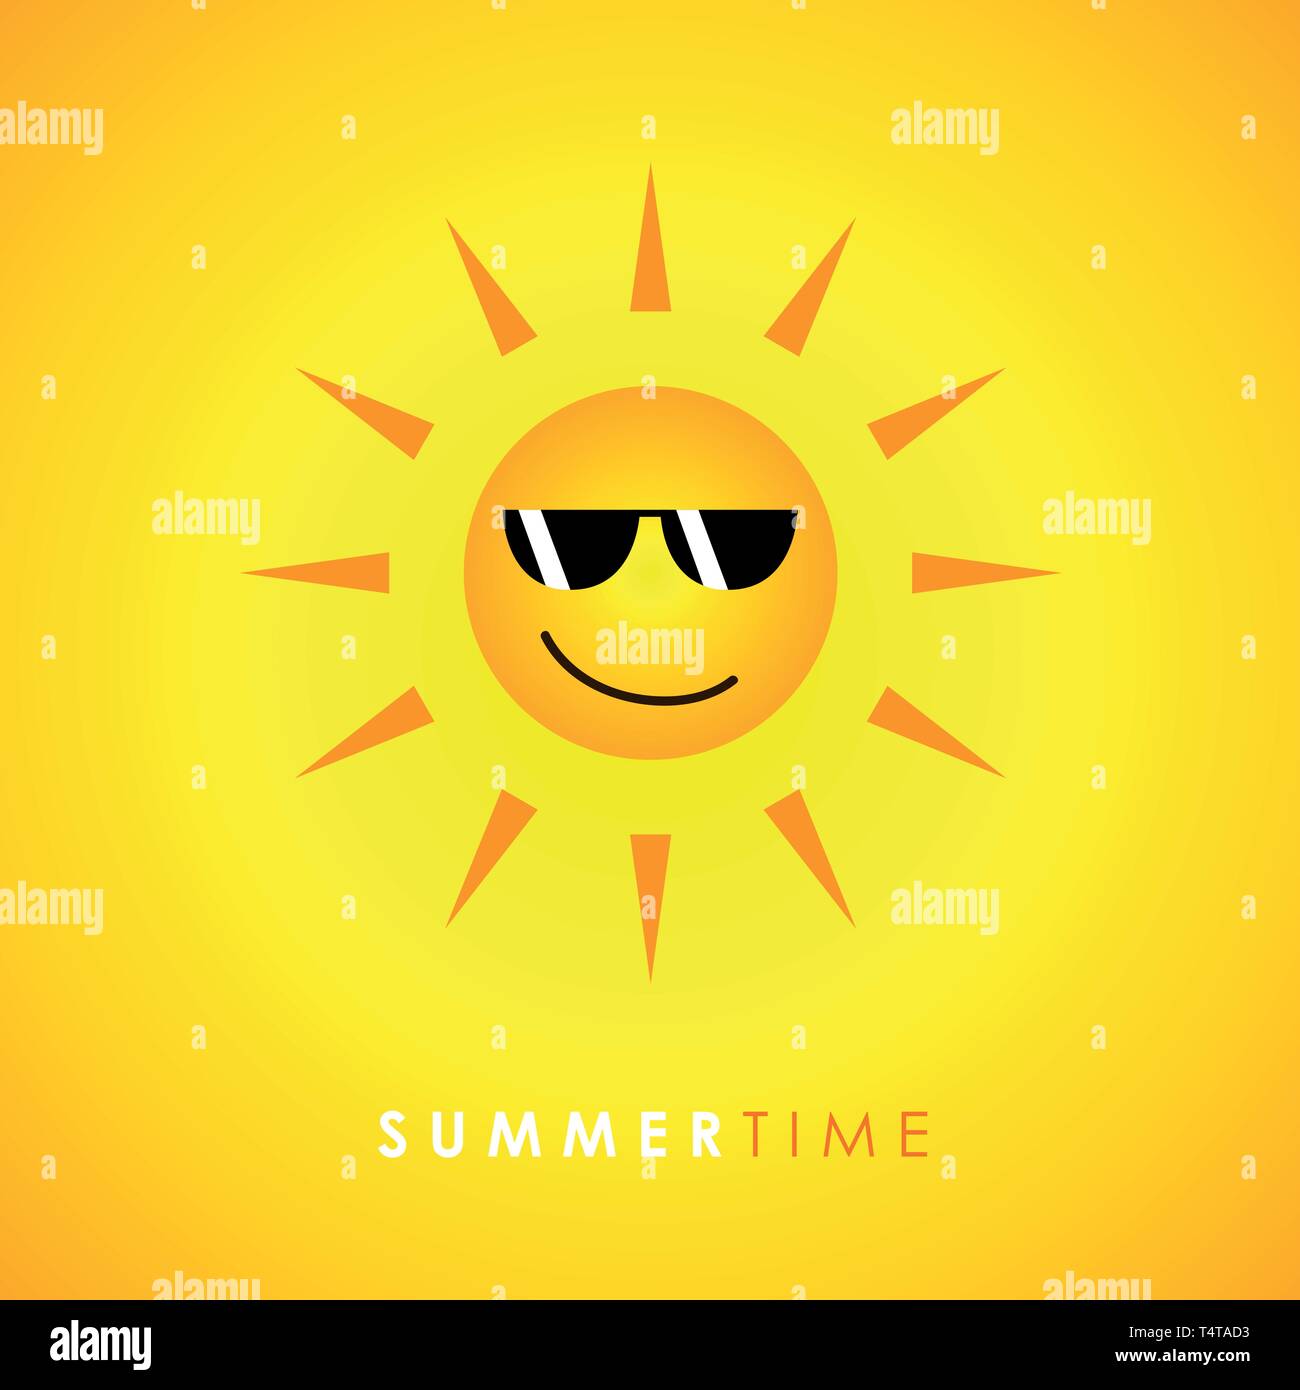 smiling sun with sunglasses on yellow background vector Illustration EPS10 Stock Vector